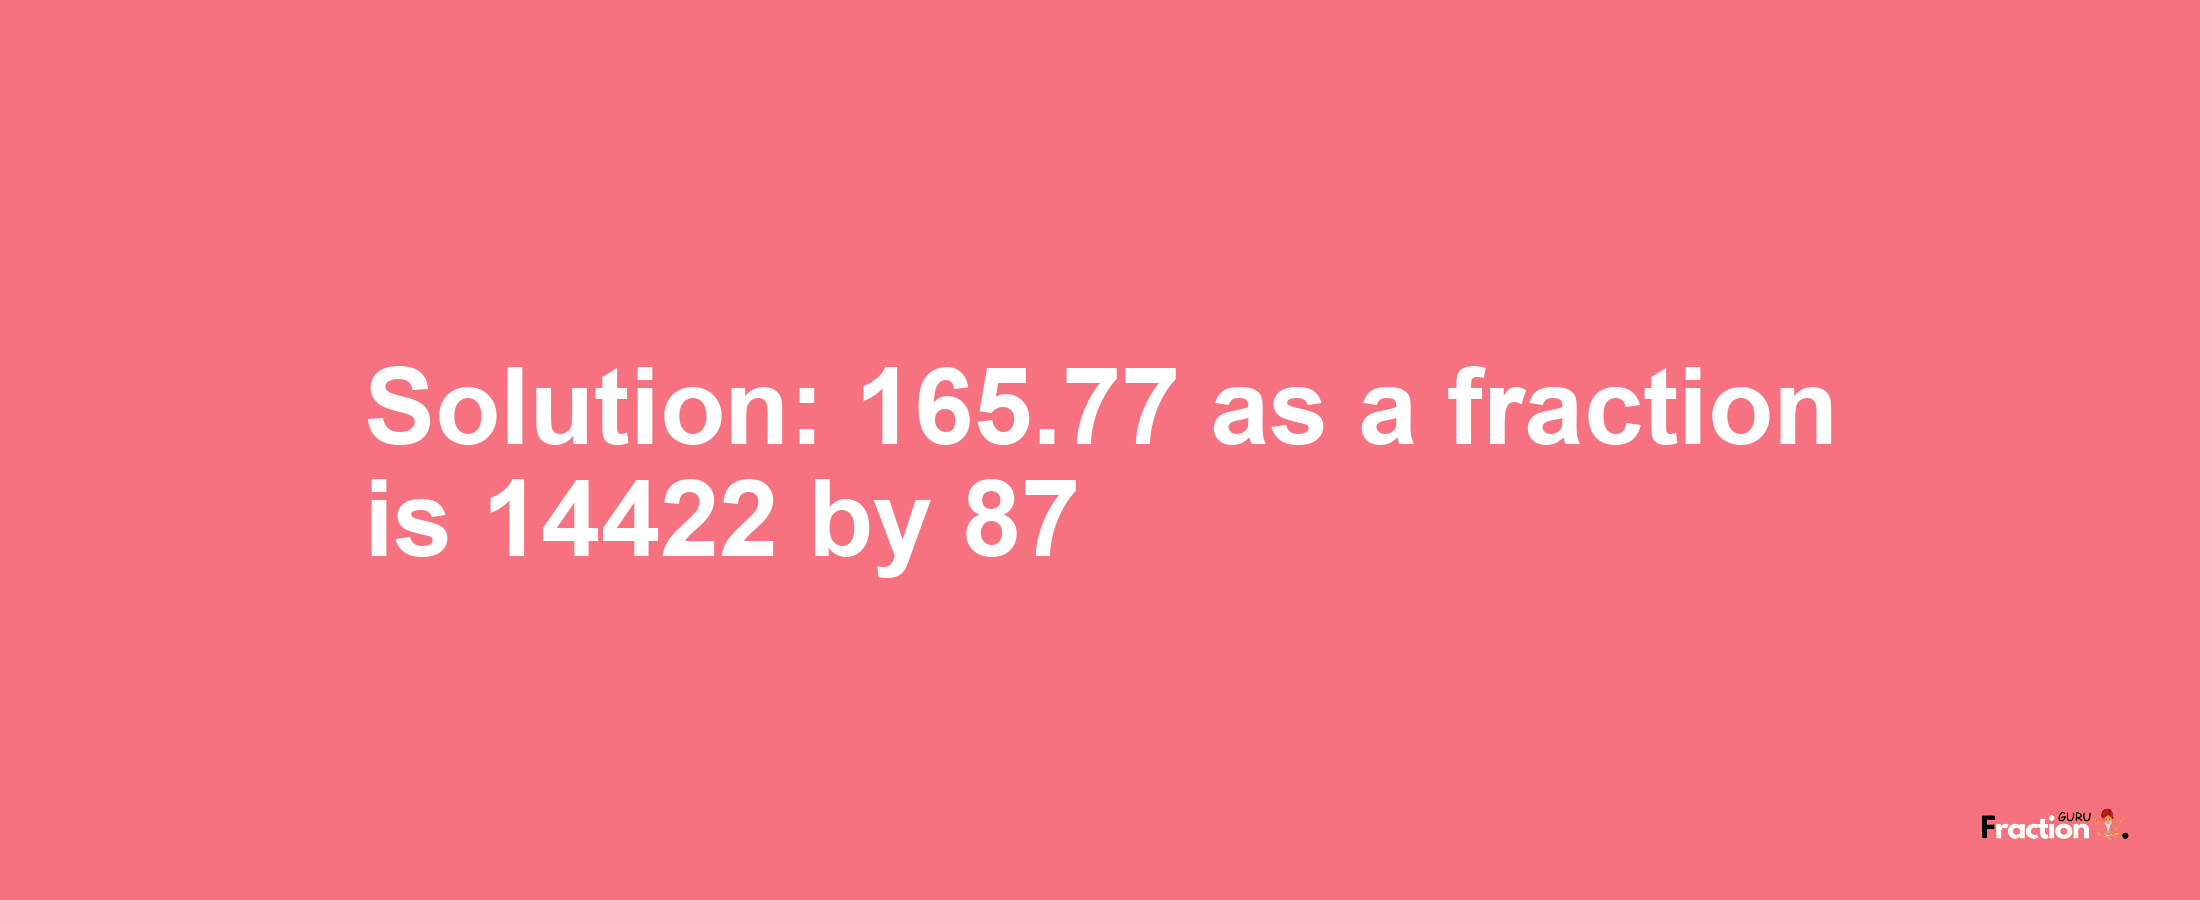 Solution:165.77 as a fraction is 14422/87